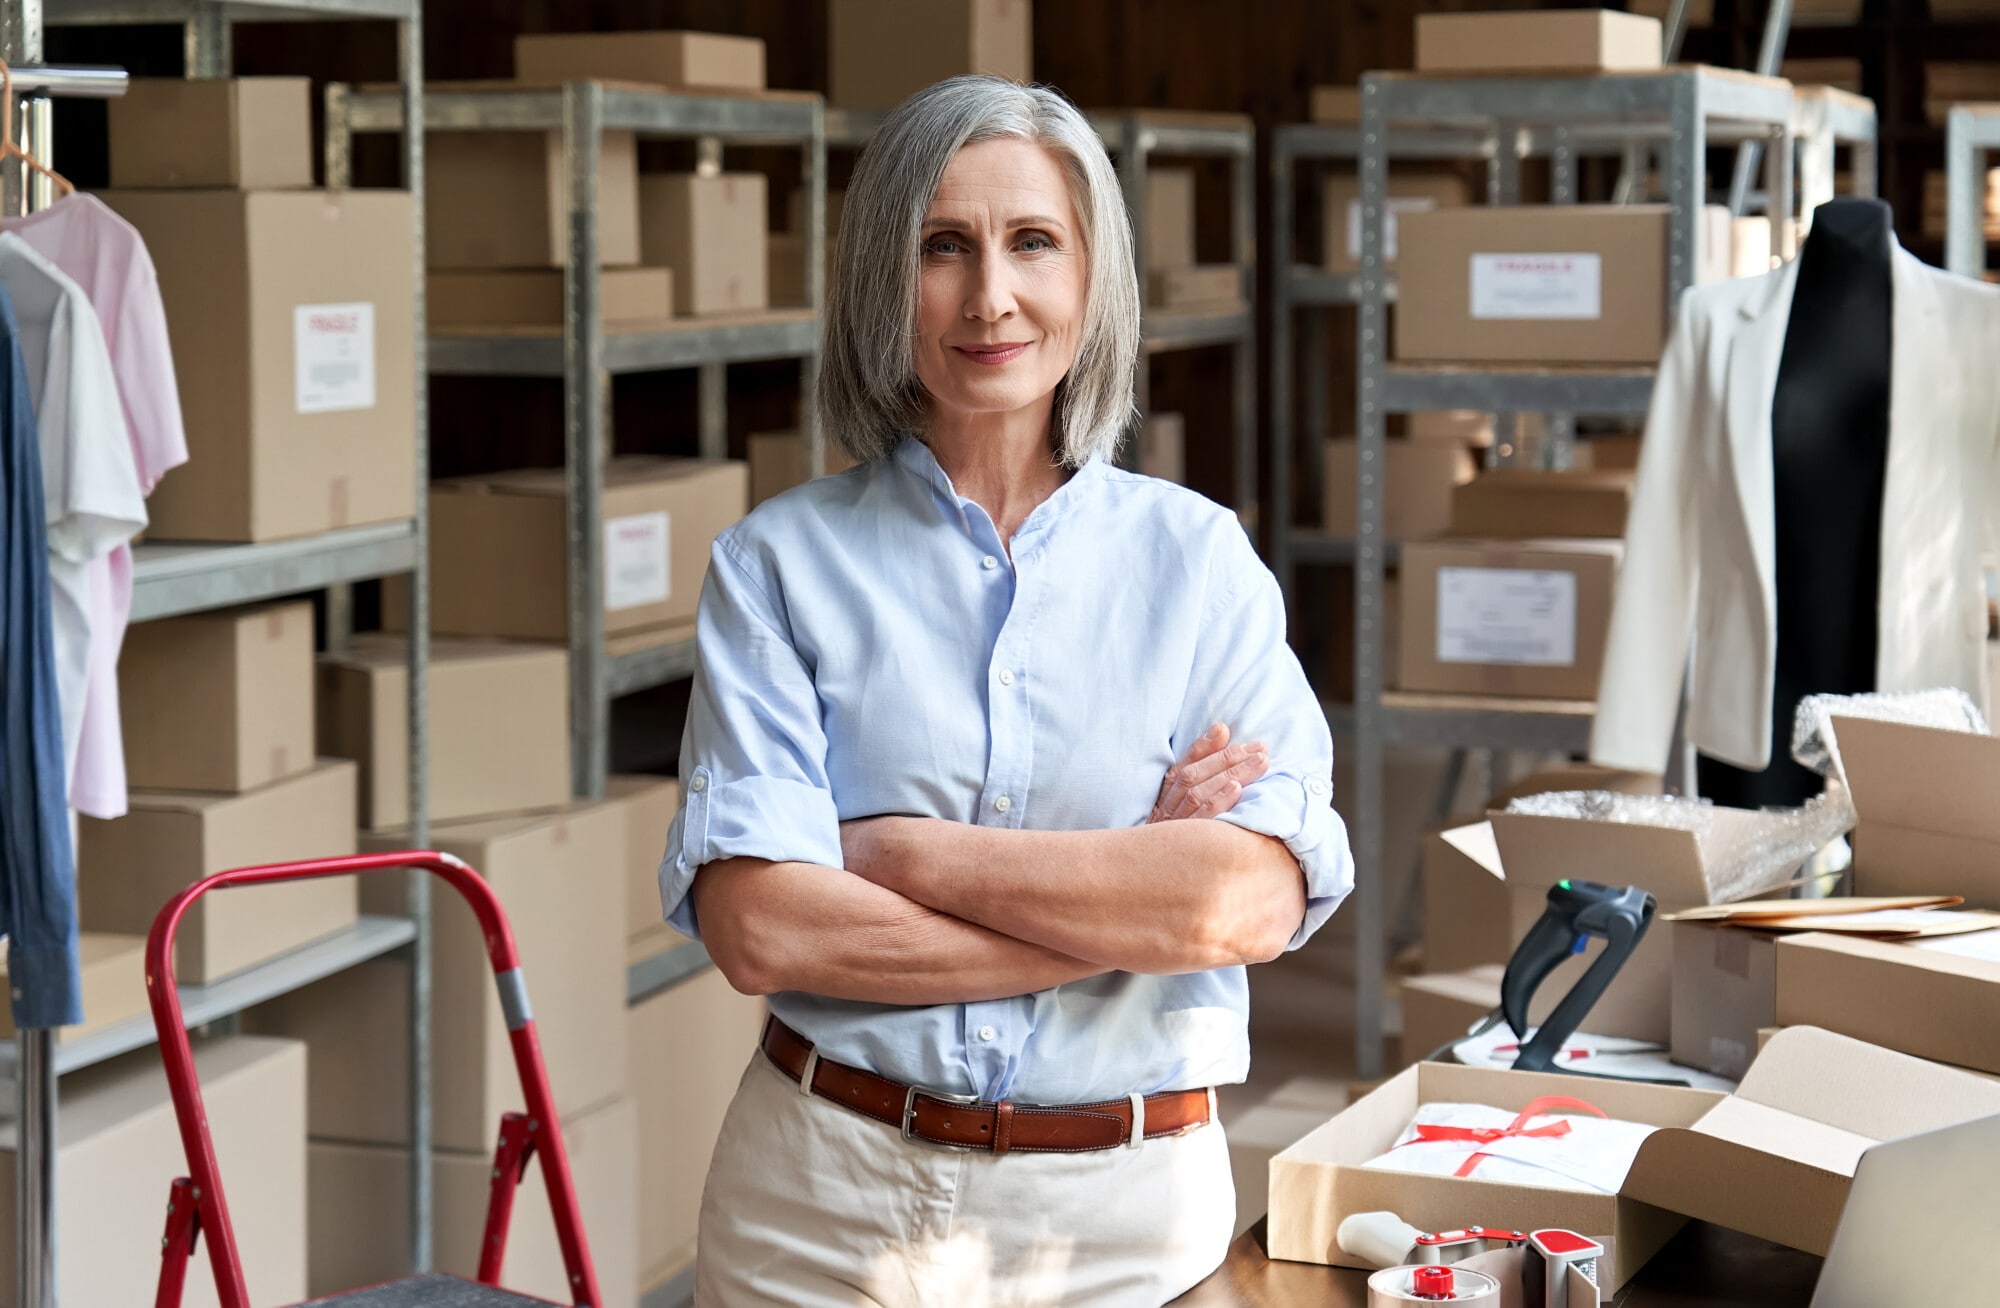 5 Tips for Finding Quality Wholesale Distributors